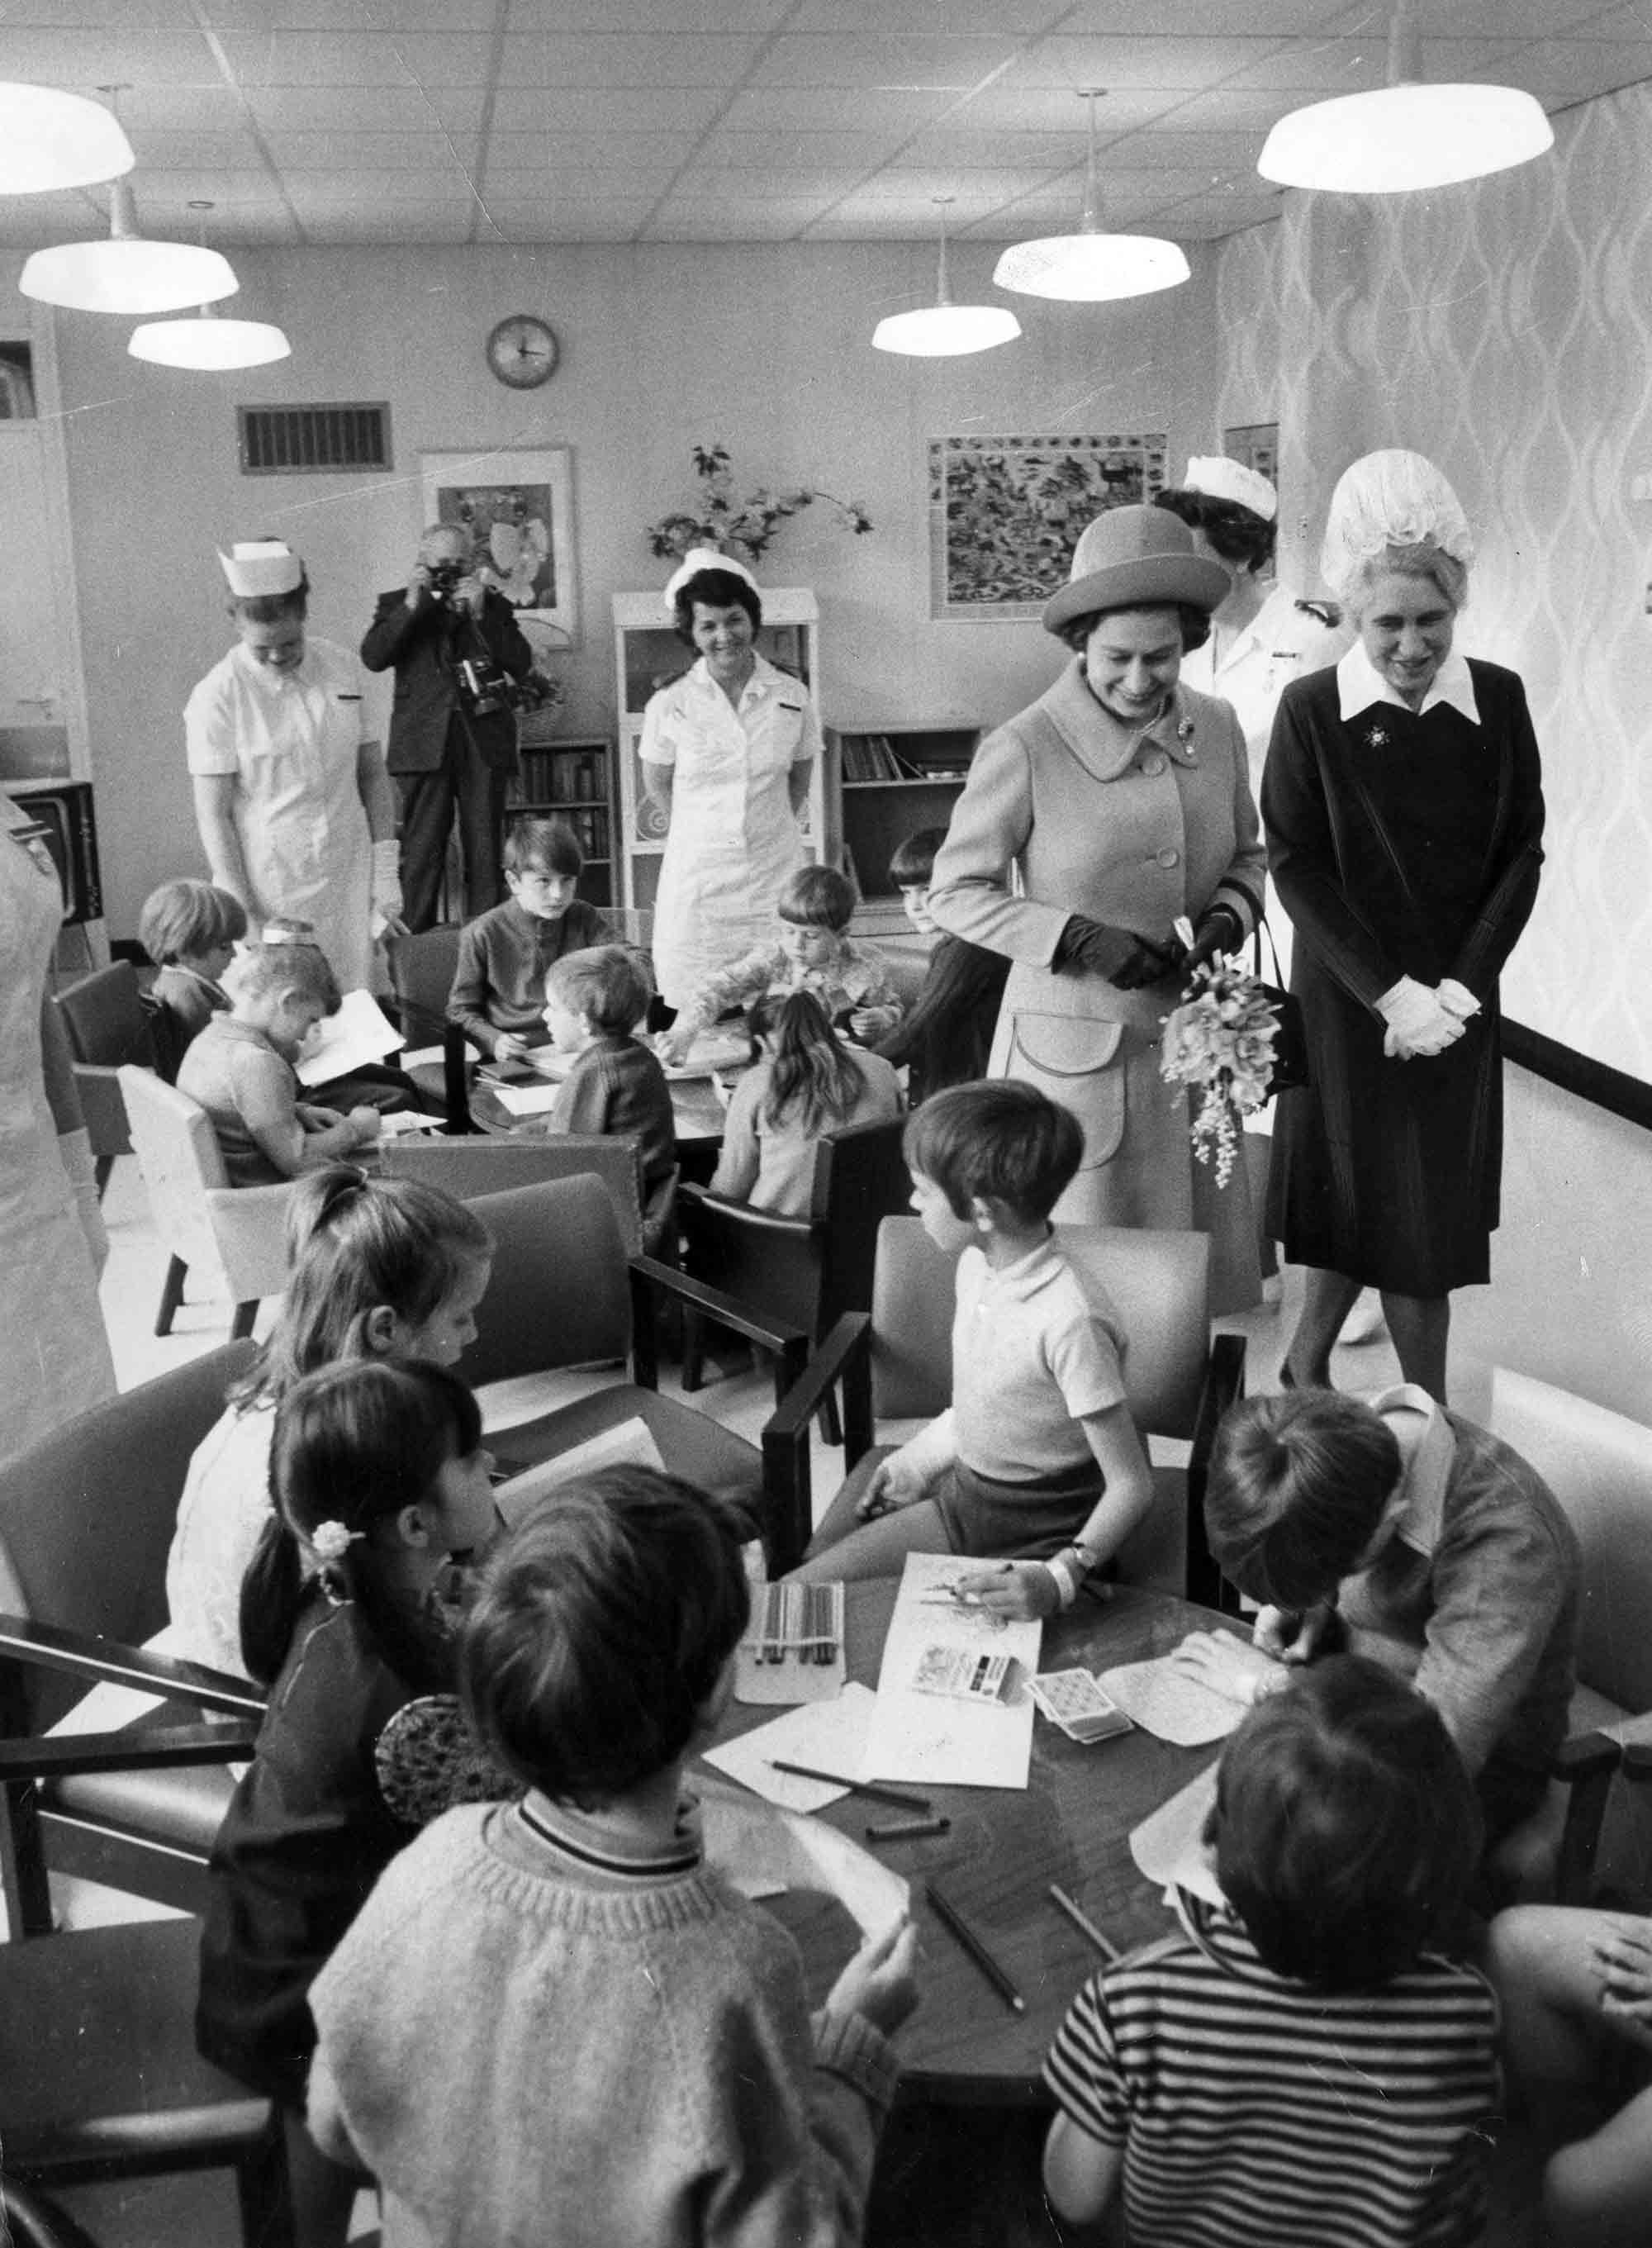 The Queen visits the children's ward at Leighton Hospital in Crewe, 4 May 1972 © Trinity Mirror / Mirrorpix / Alamy Stock Photo